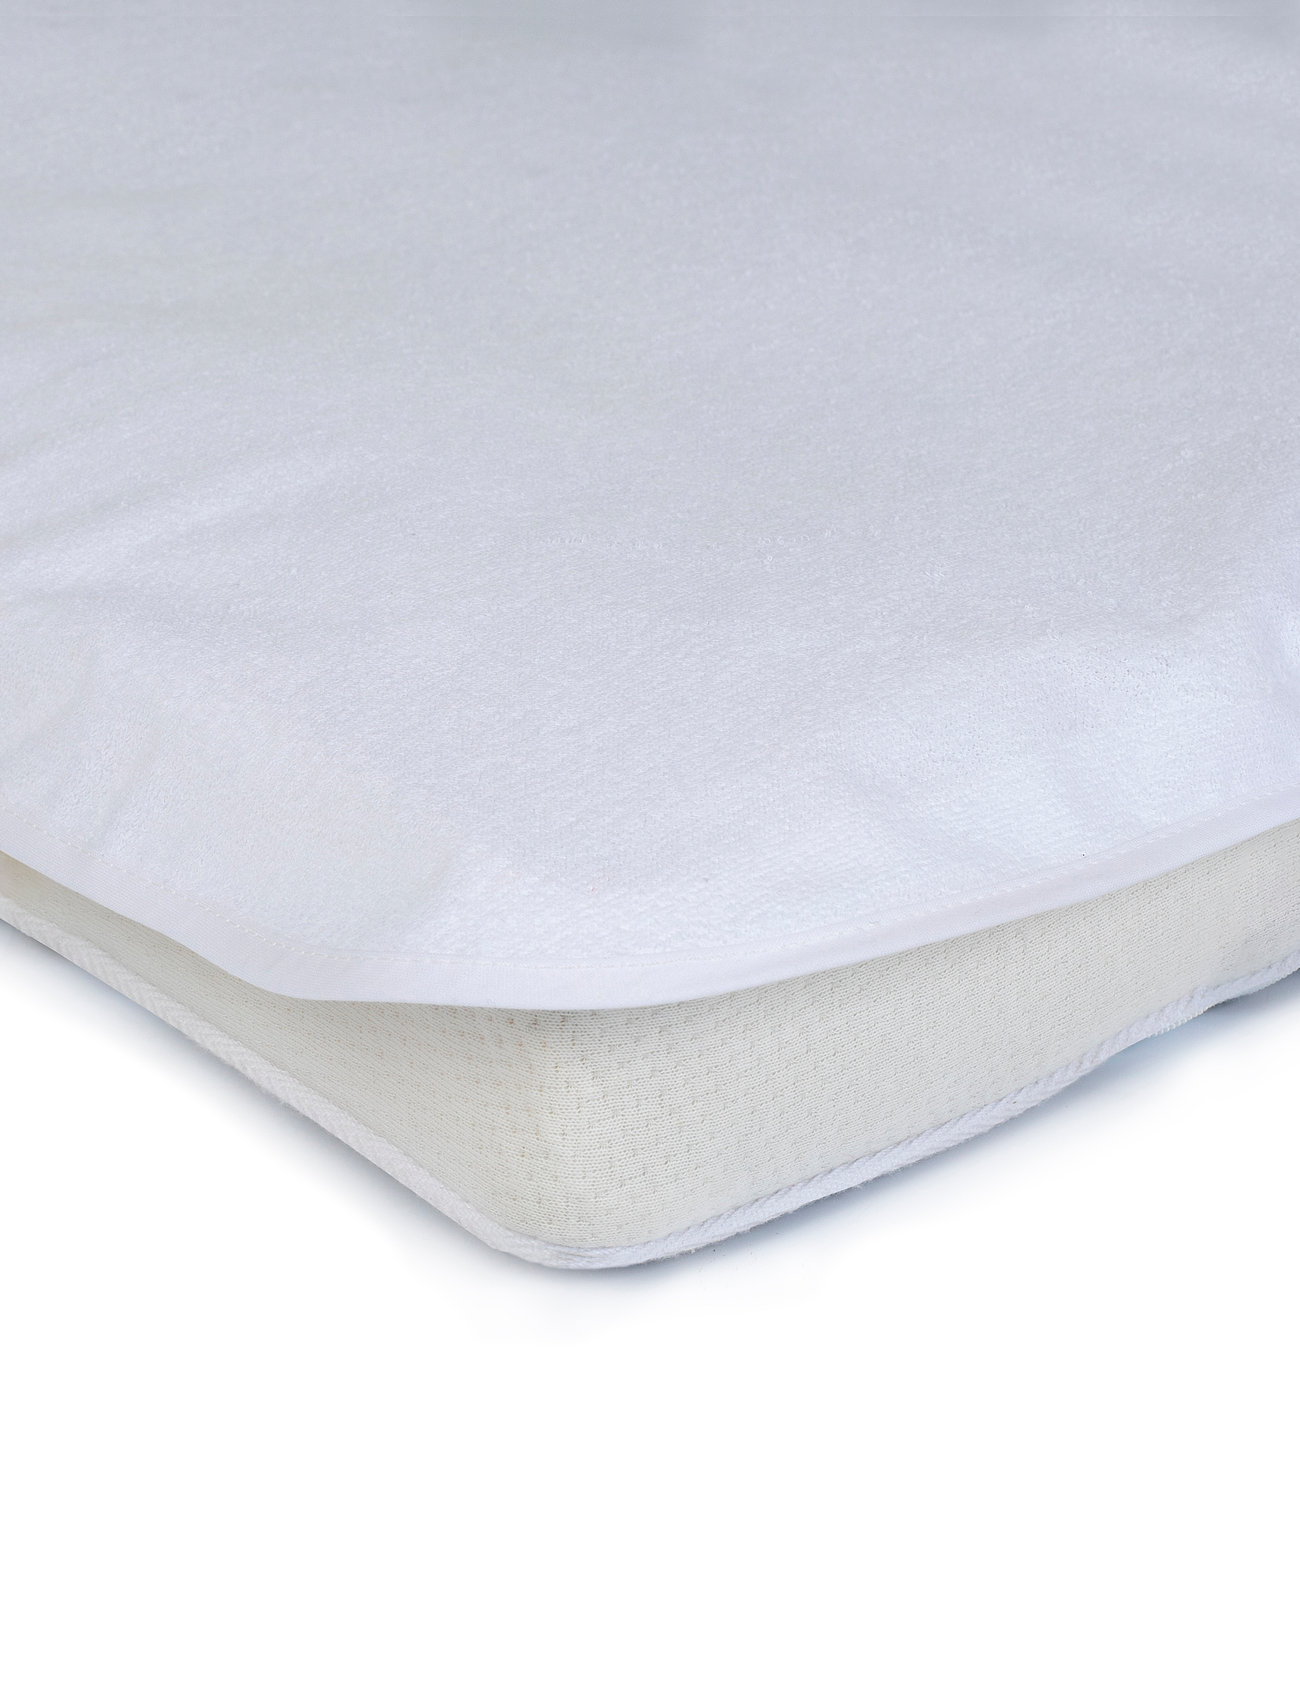 Protect Baby Matress Protection Baby & Maternity Baby Sleep Baby Nest Sheet White Mille Notti